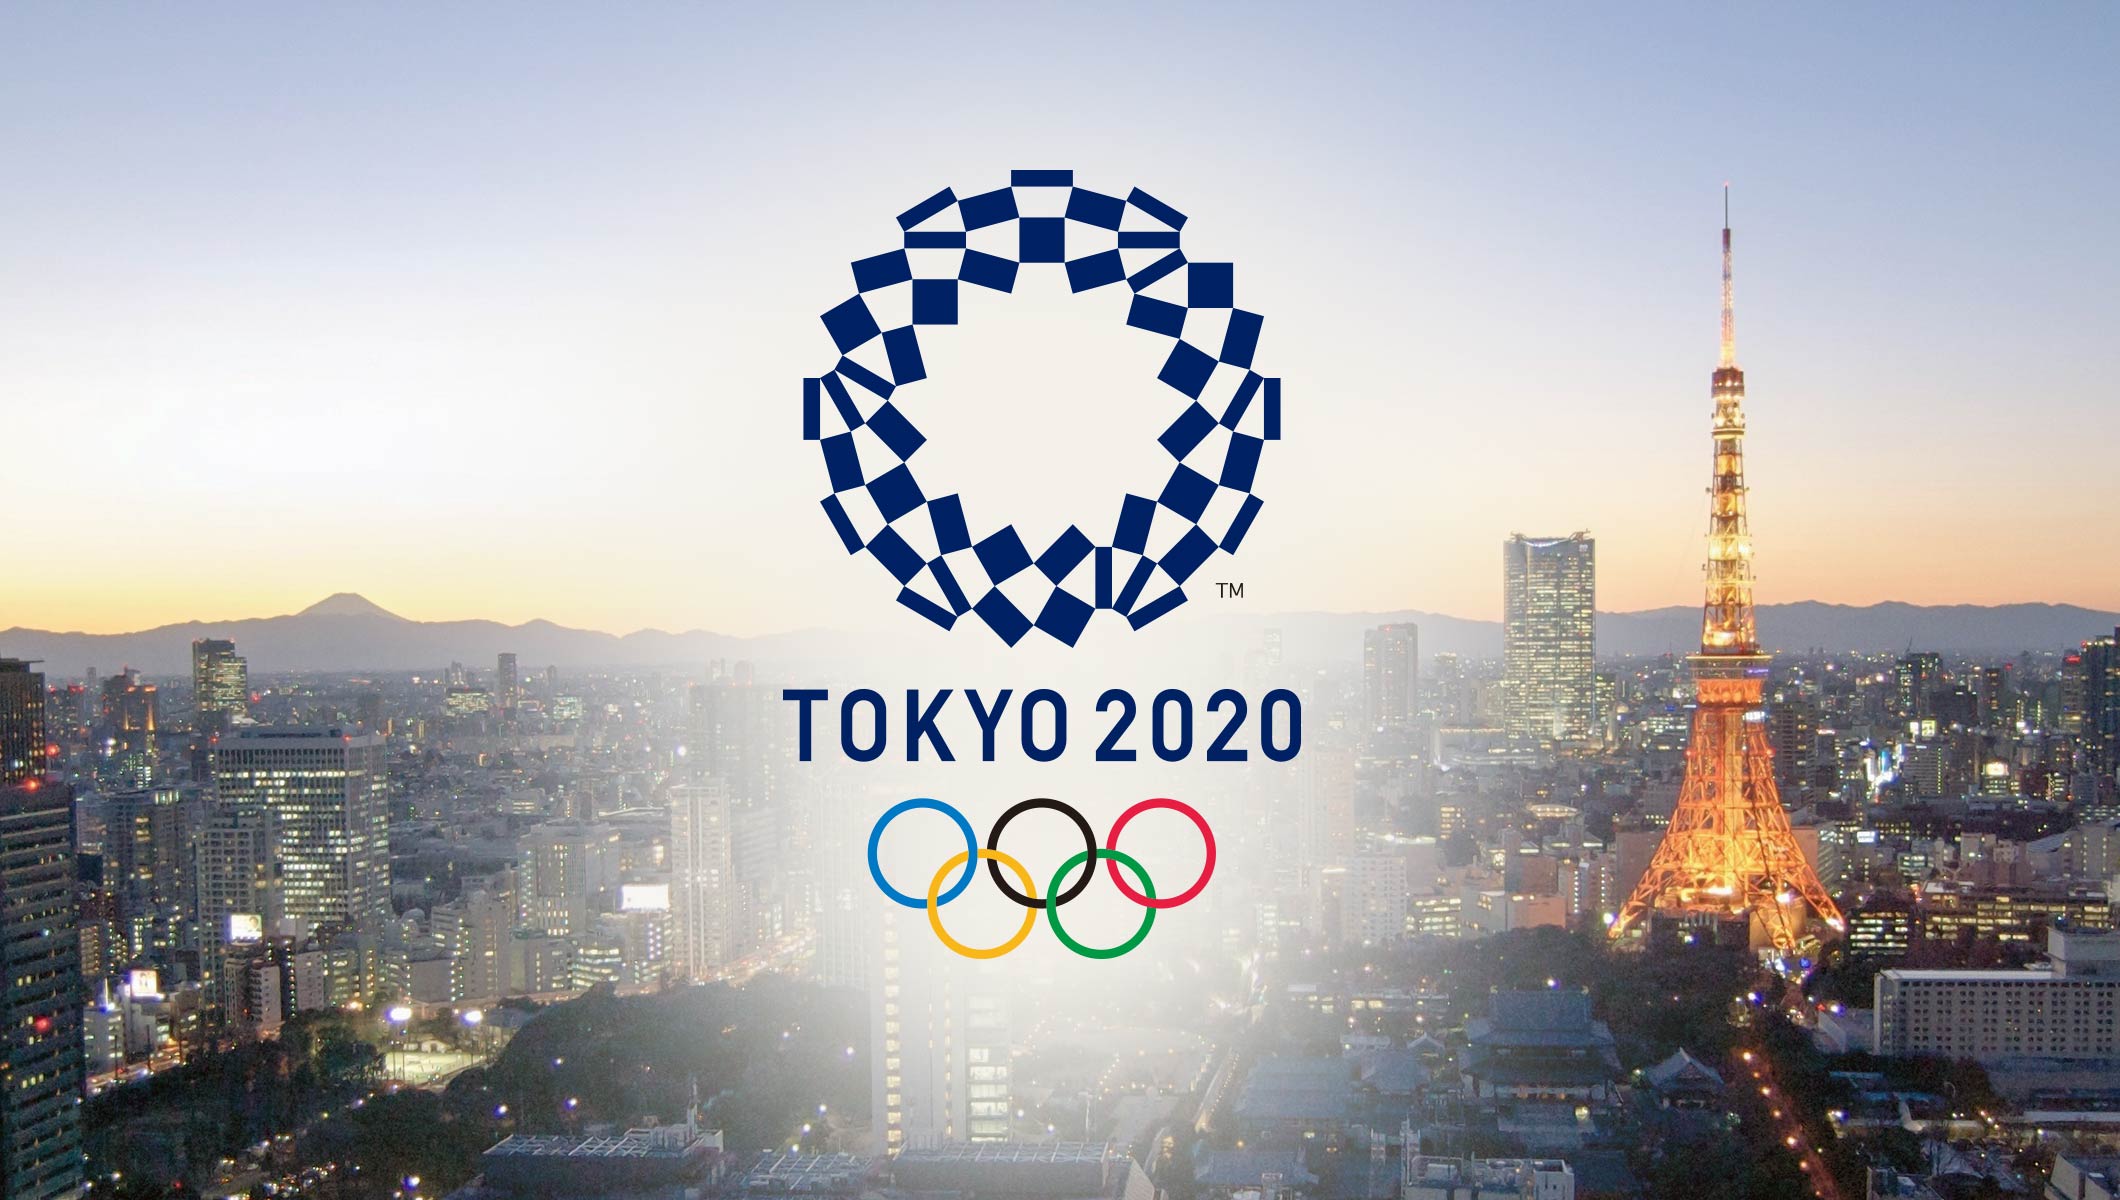 Tokyo 2020: a Unique Opportunity for Japanese Tourism